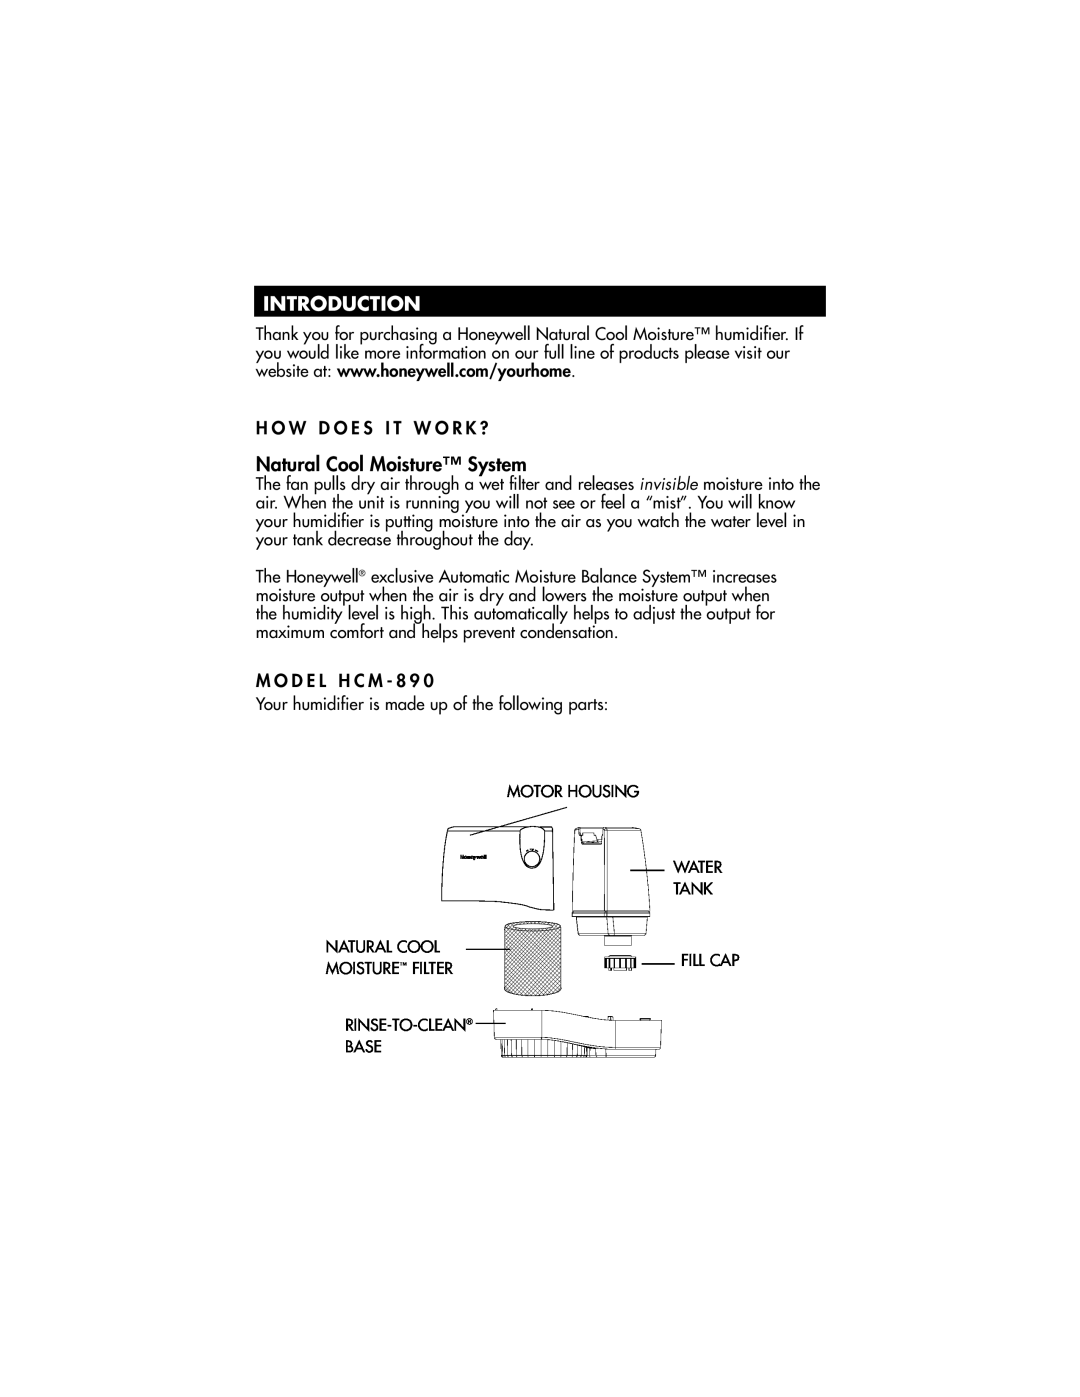 Honeywell HCM-890 owner manual Introduction, Natural Cool Moisture System 